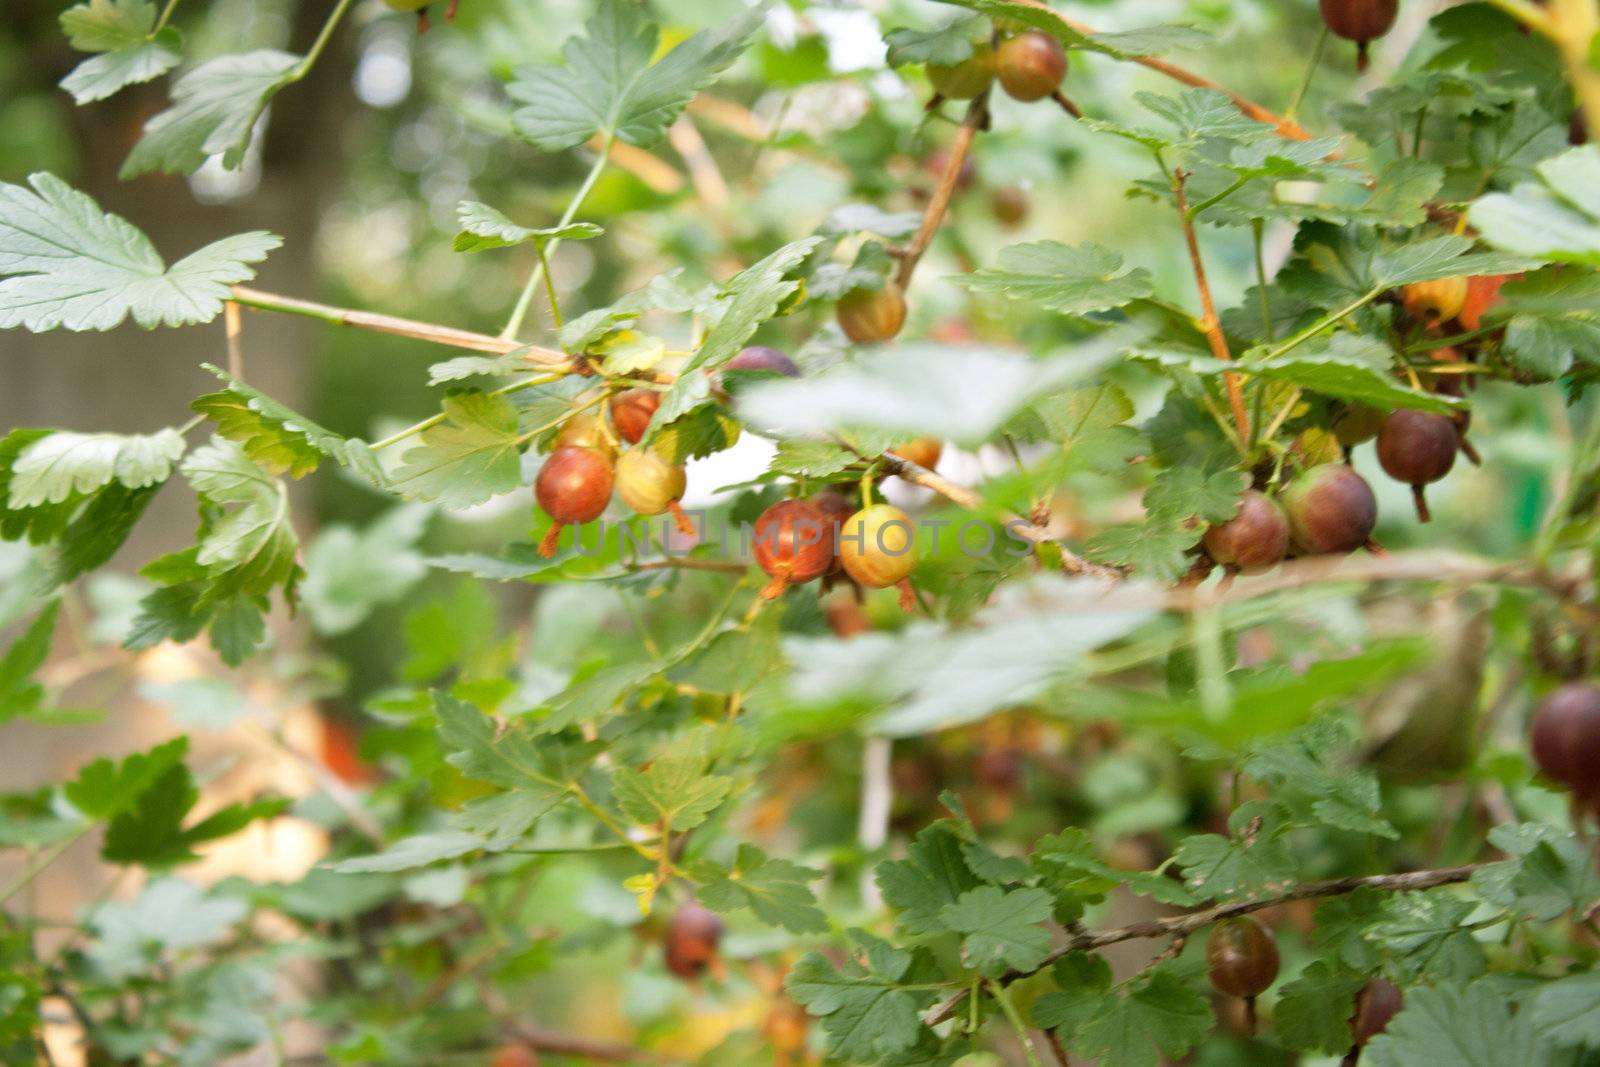 Gooseberry bush with ripe berries in the street shooting